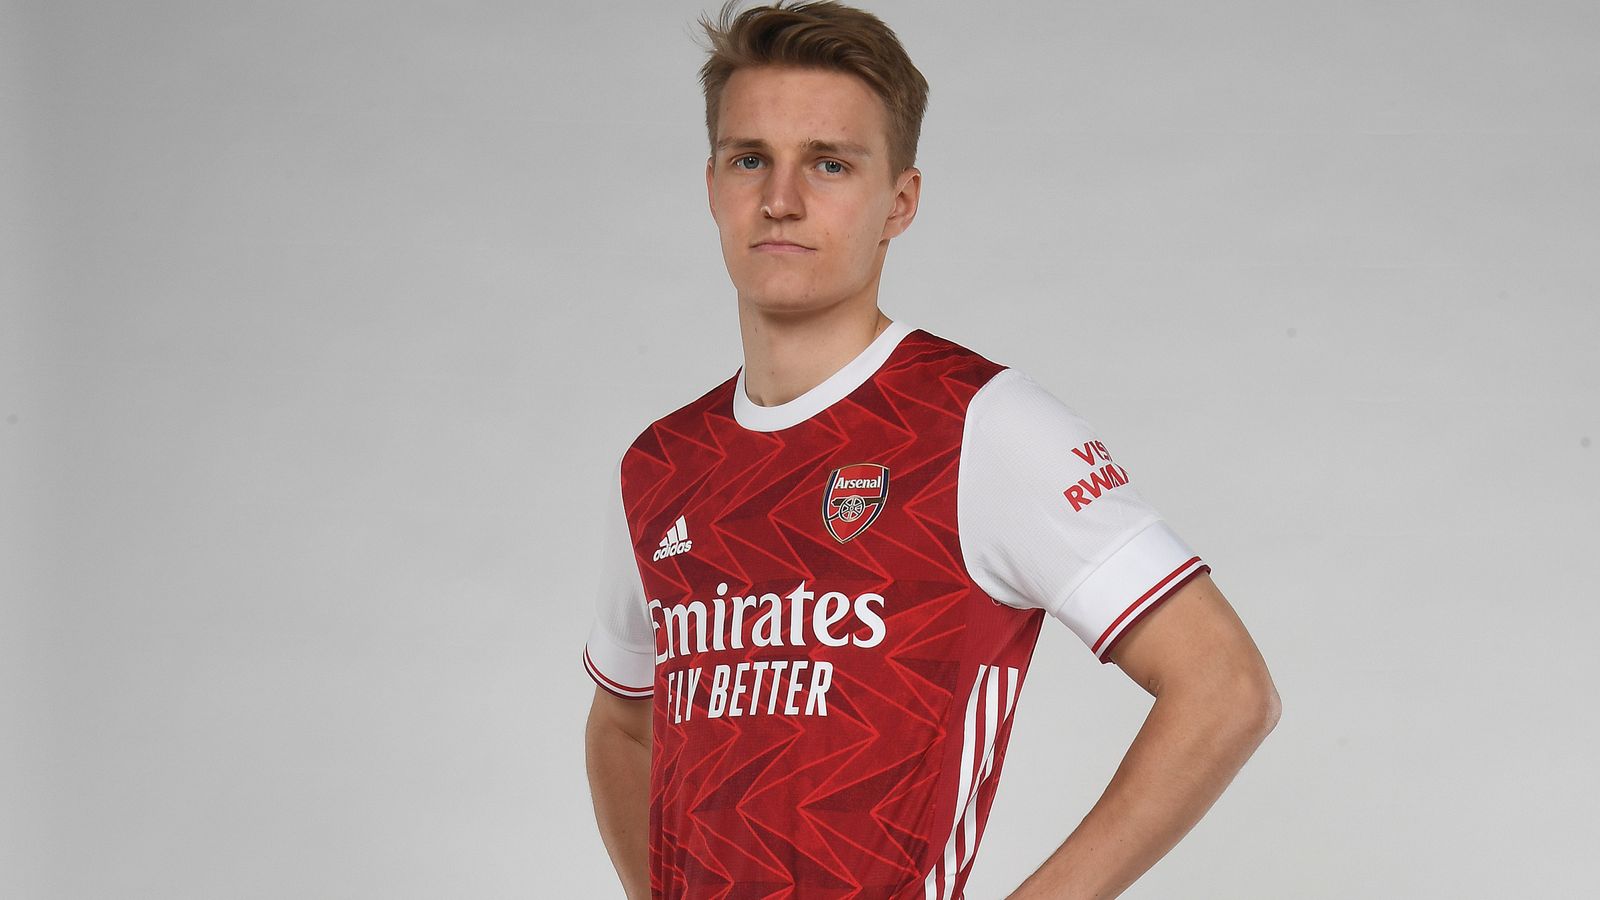 Win the 21/22 Arsenal Home kit, Competition, News